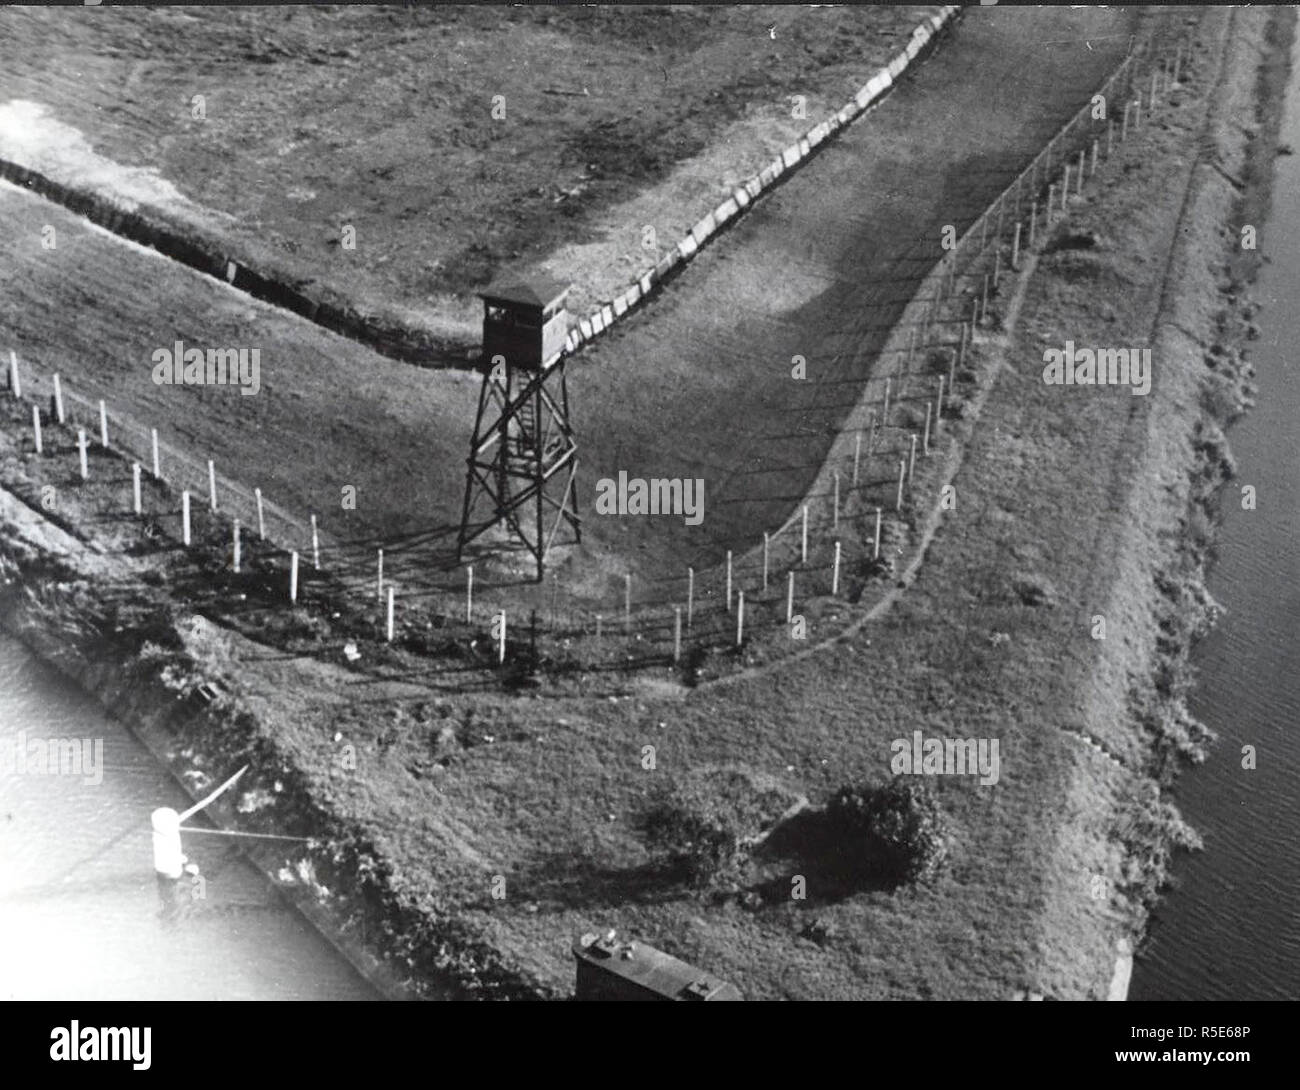 October 1961 - Berlin, October Neukoelln, The Teltow Canal Connects With the Neukoellner Eastern Harbor and the Britzer Canal and Builds the Border The East and West Berlin. A Watch Tower Was Erected at the Intersecting Parts of 2 Canals Where the Volkspolzei Shoot an Escapee. Stock Photo